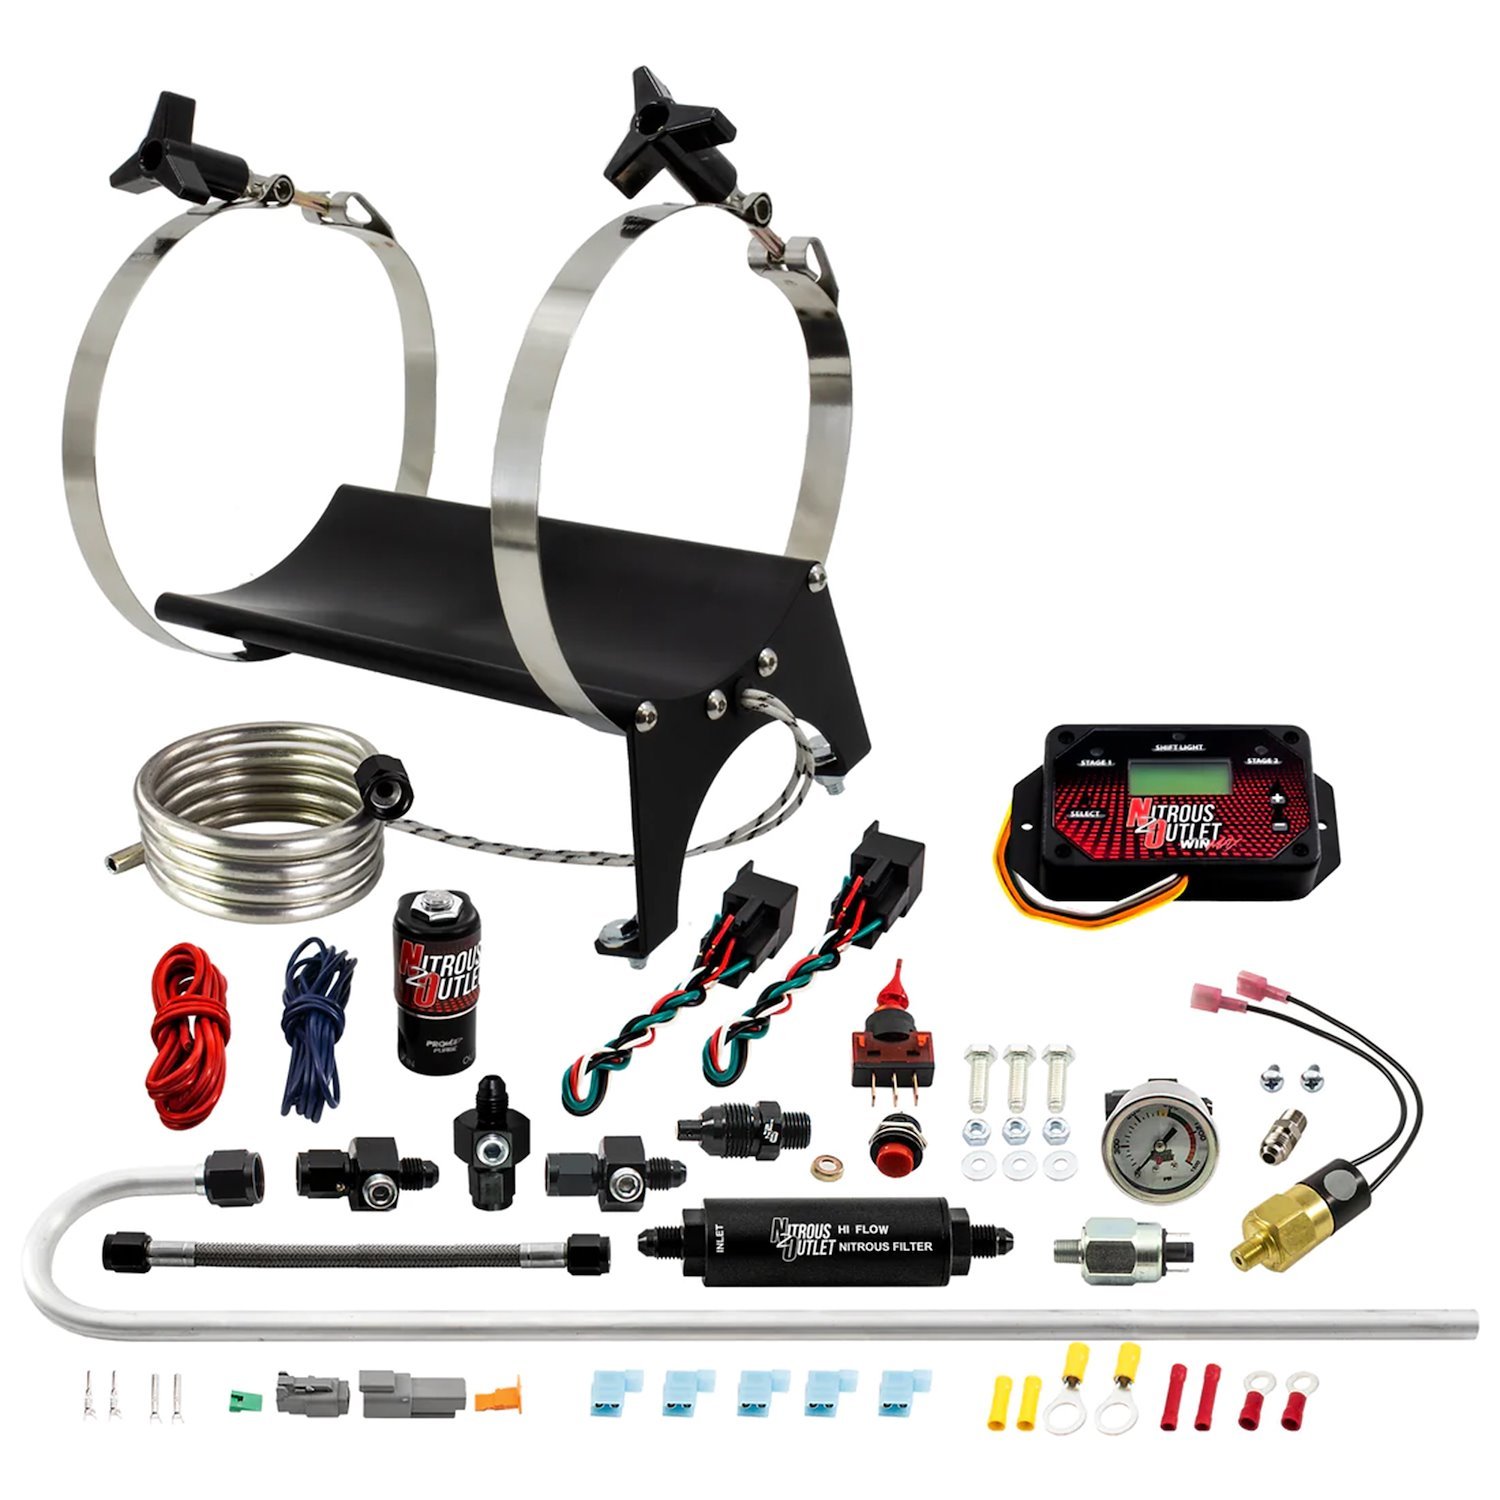 00-69002-L4 Ultimate Nitrous Accessory Package, WinMax, Low Fuel Pressure/4AN